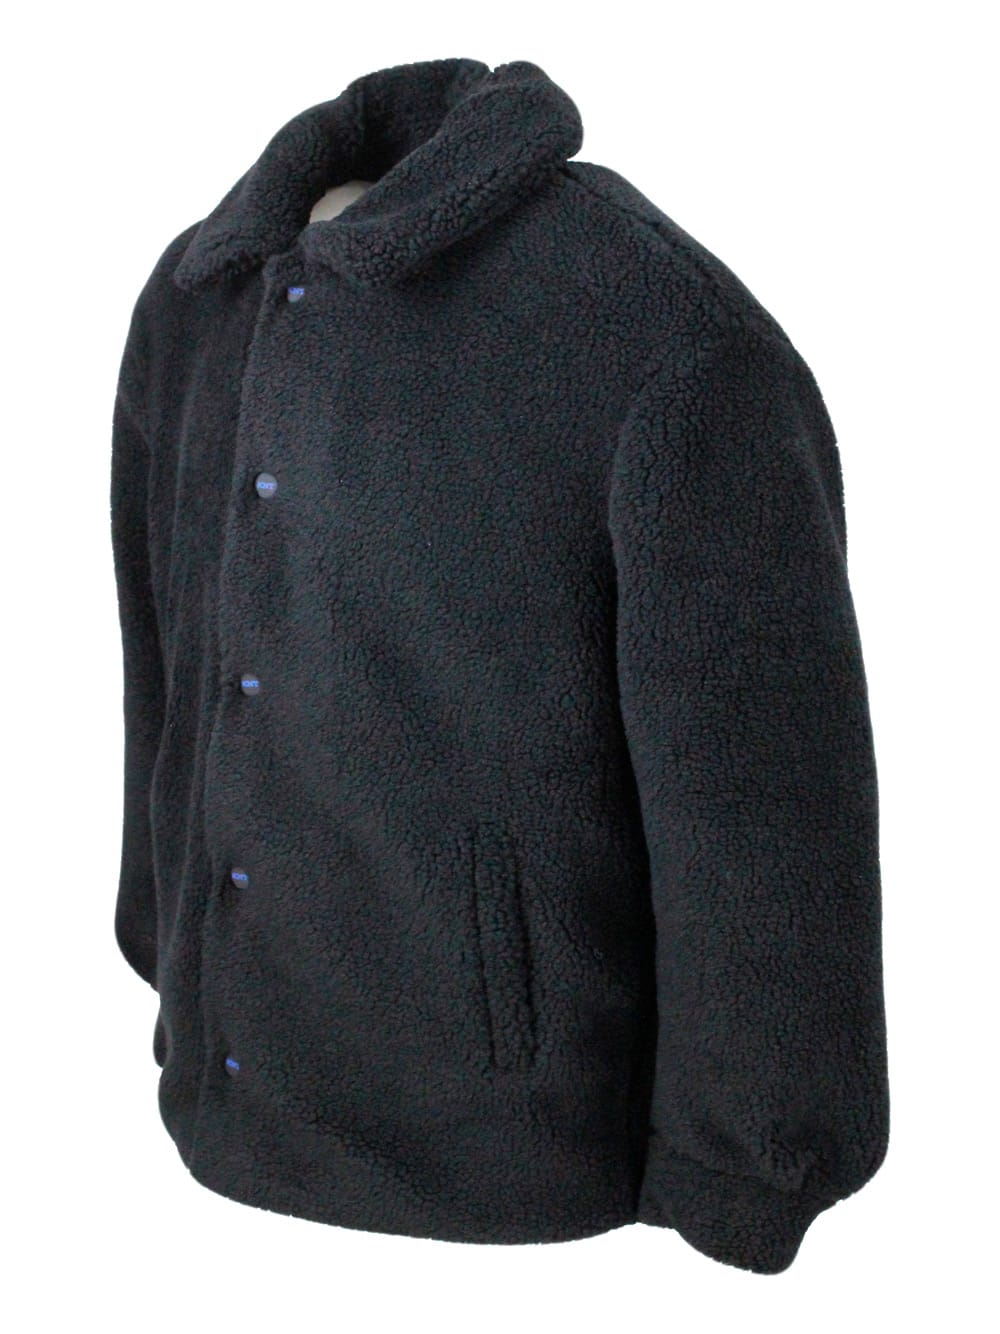 Shop Kiton Vest Jacket With Snap Button Closure In Soft Eco Bear. Gro Trims And Matching Inner Lining In Blu Navy